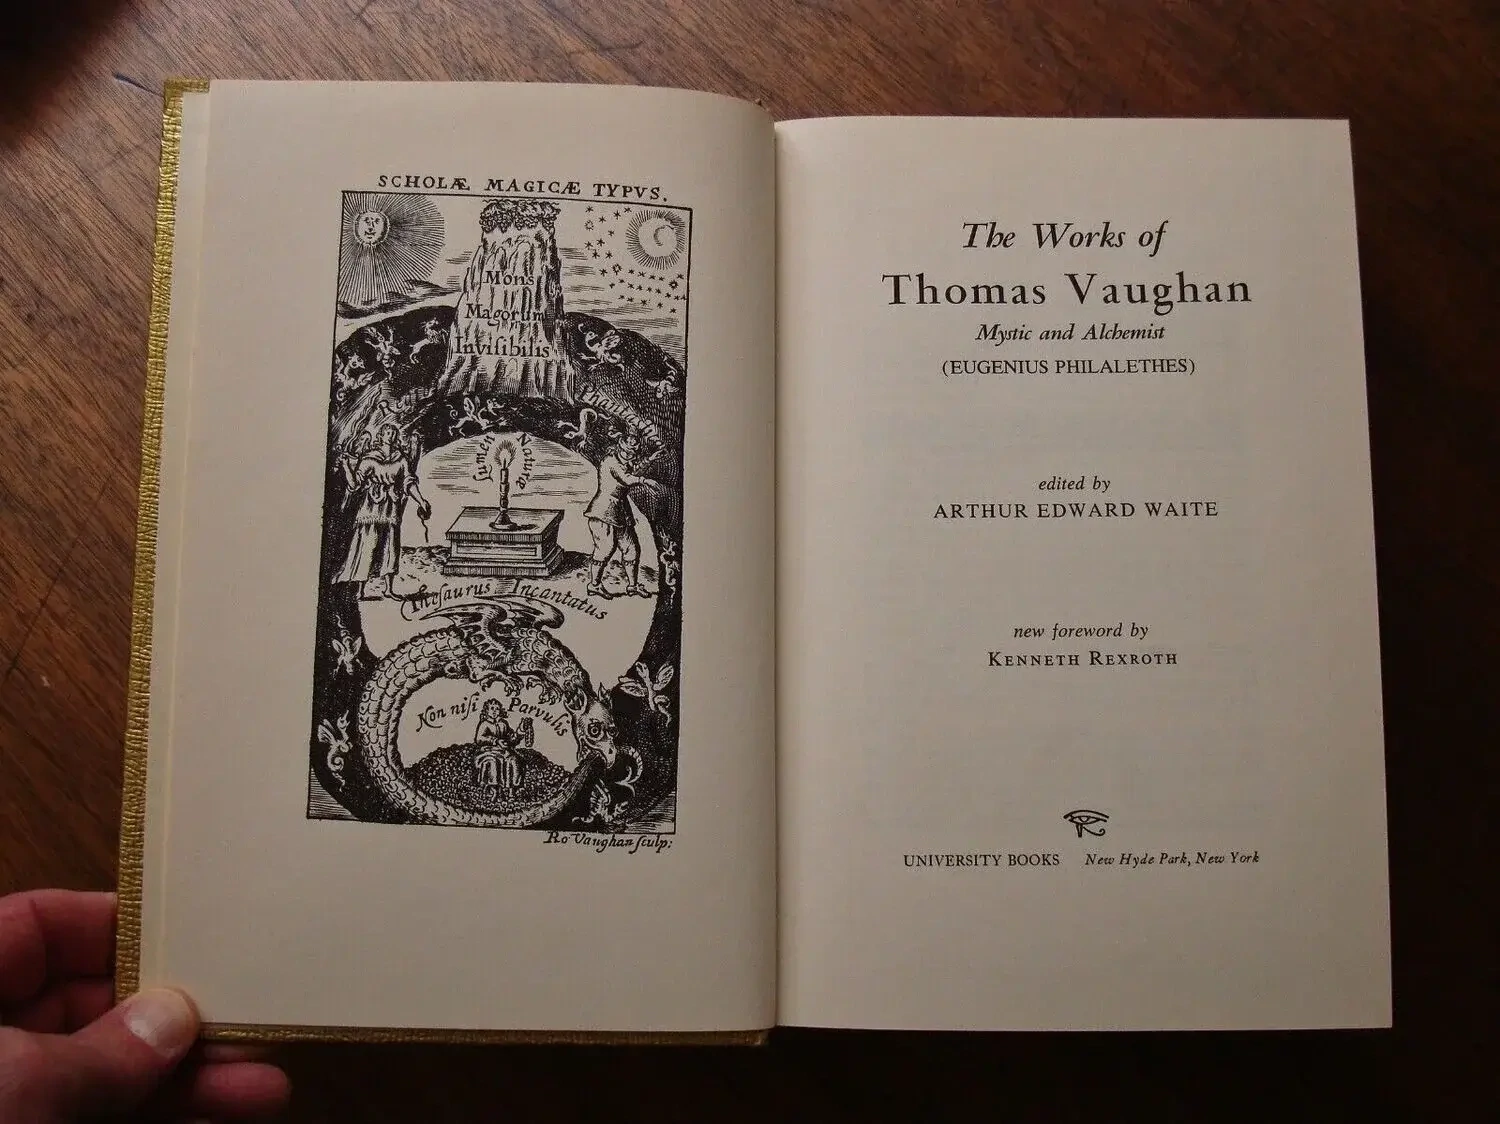 The Works of Thomas Vaughn